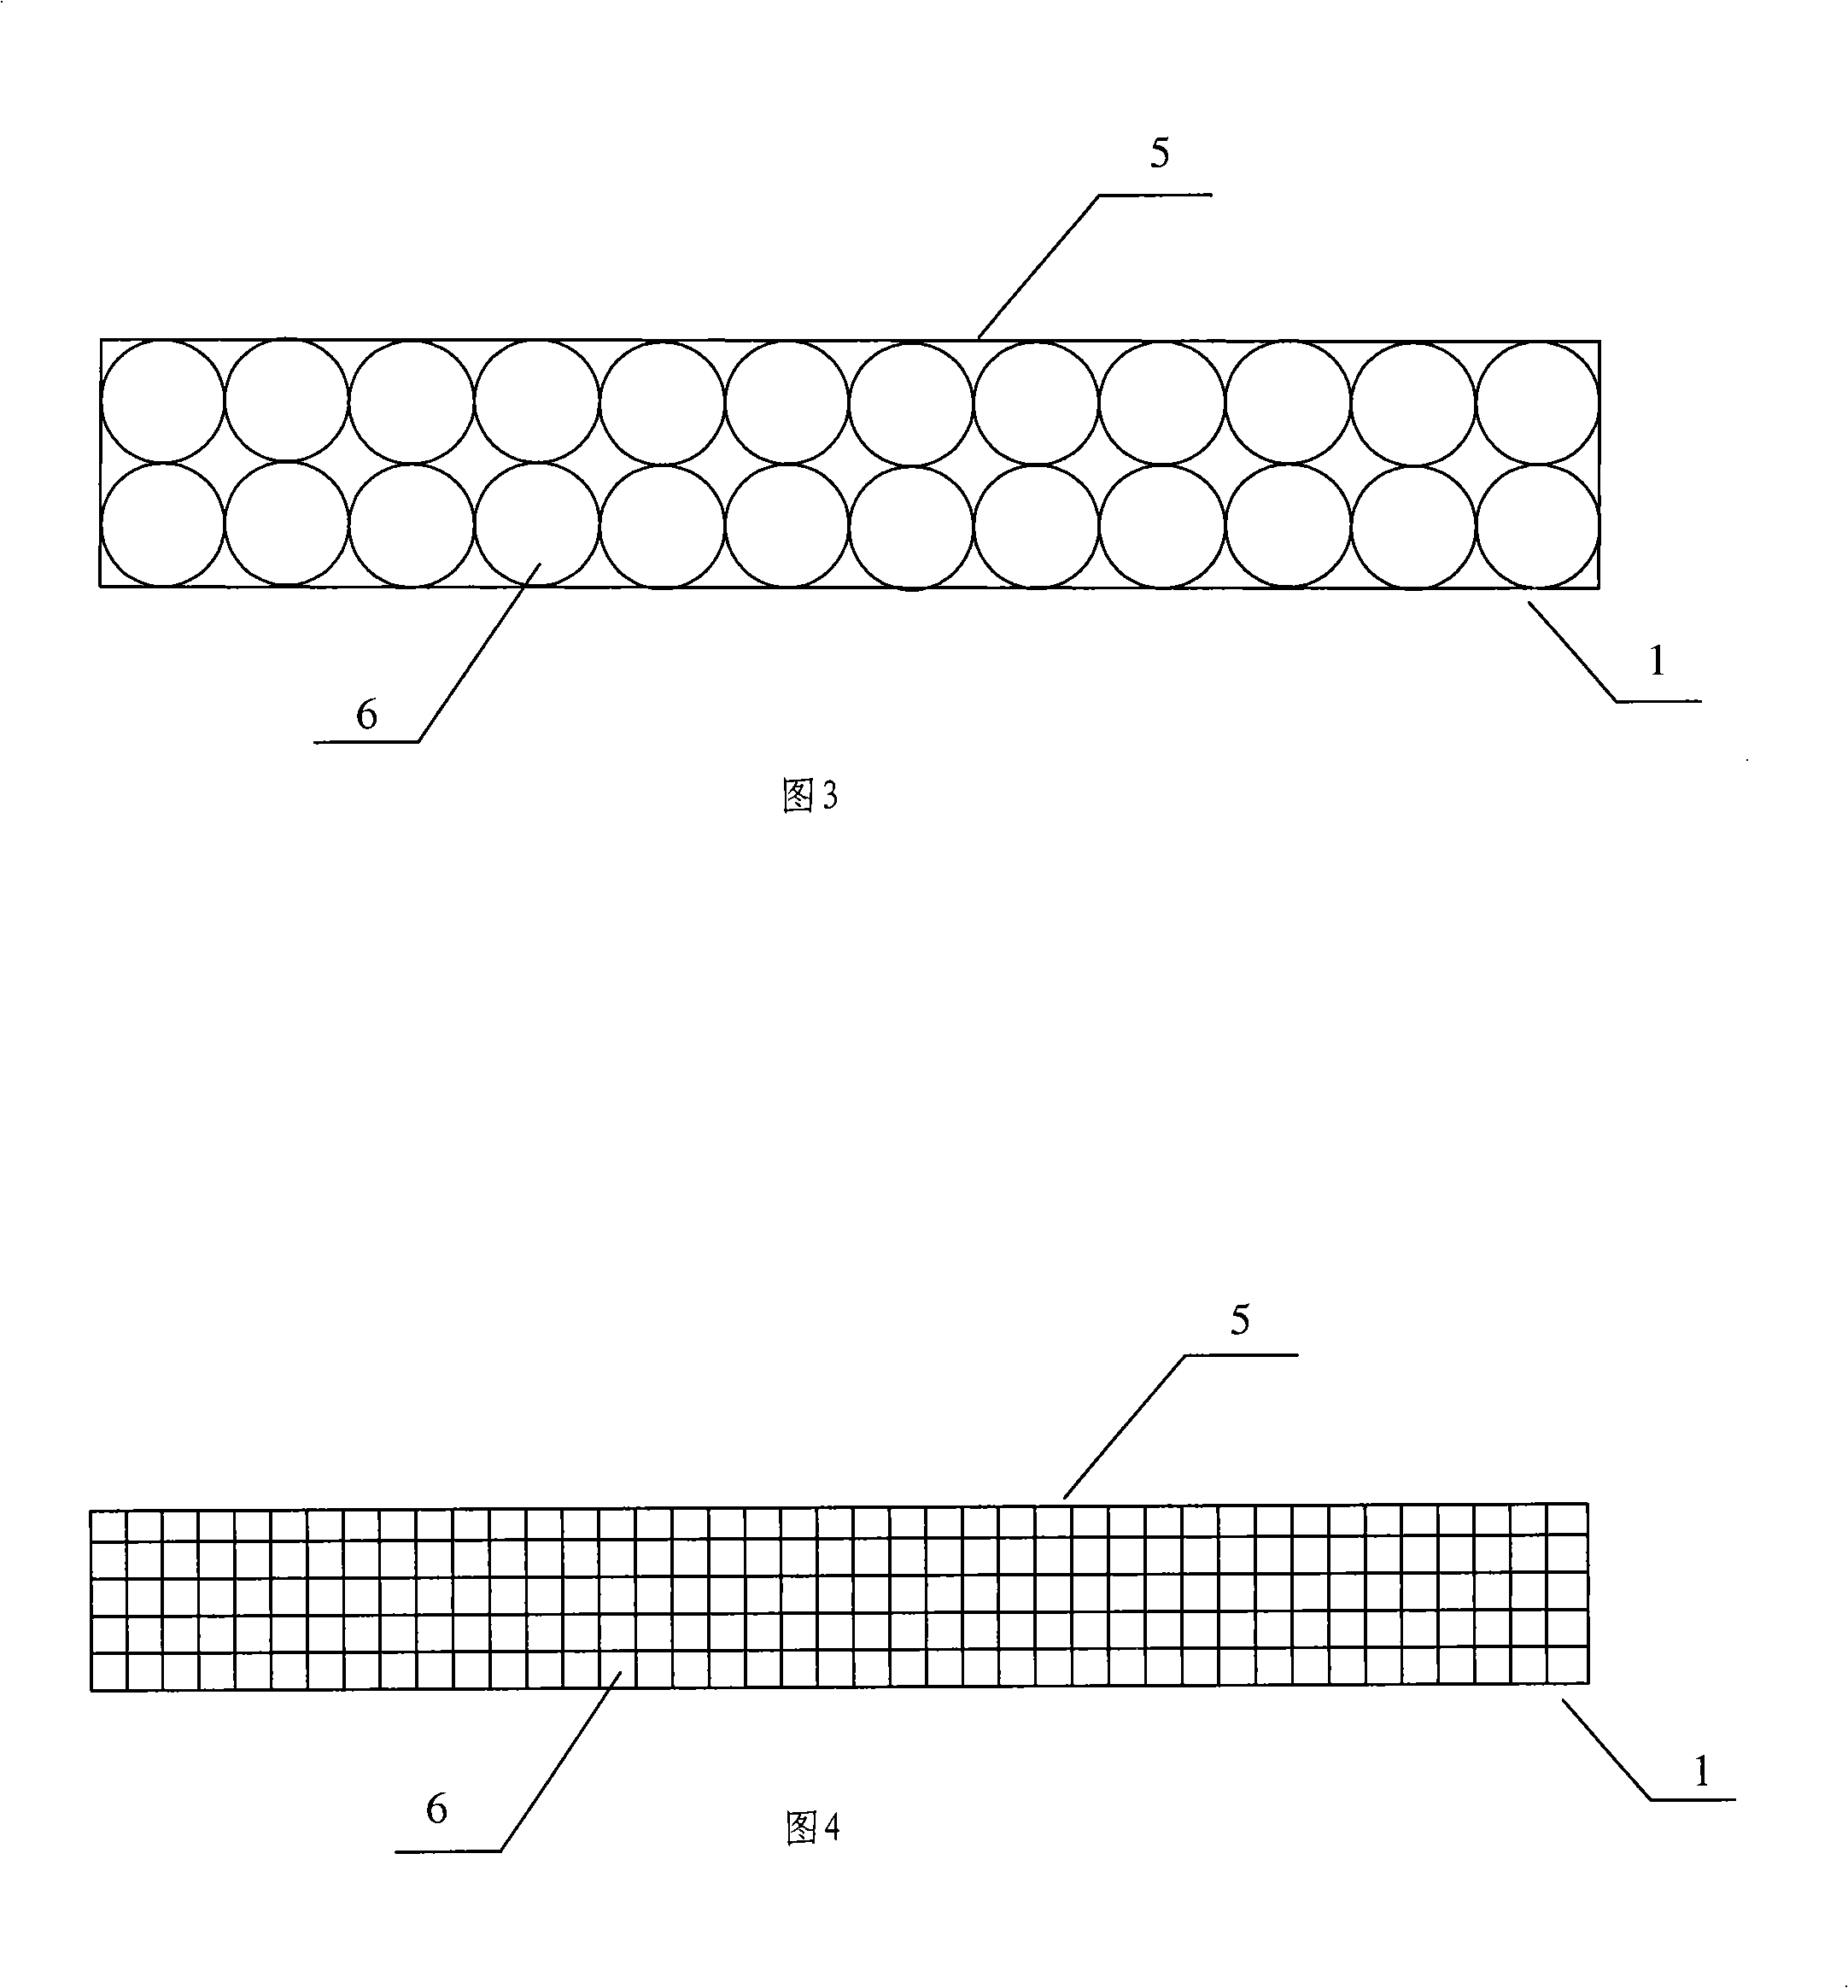 Plate-shaped heat pipe and its processing technique